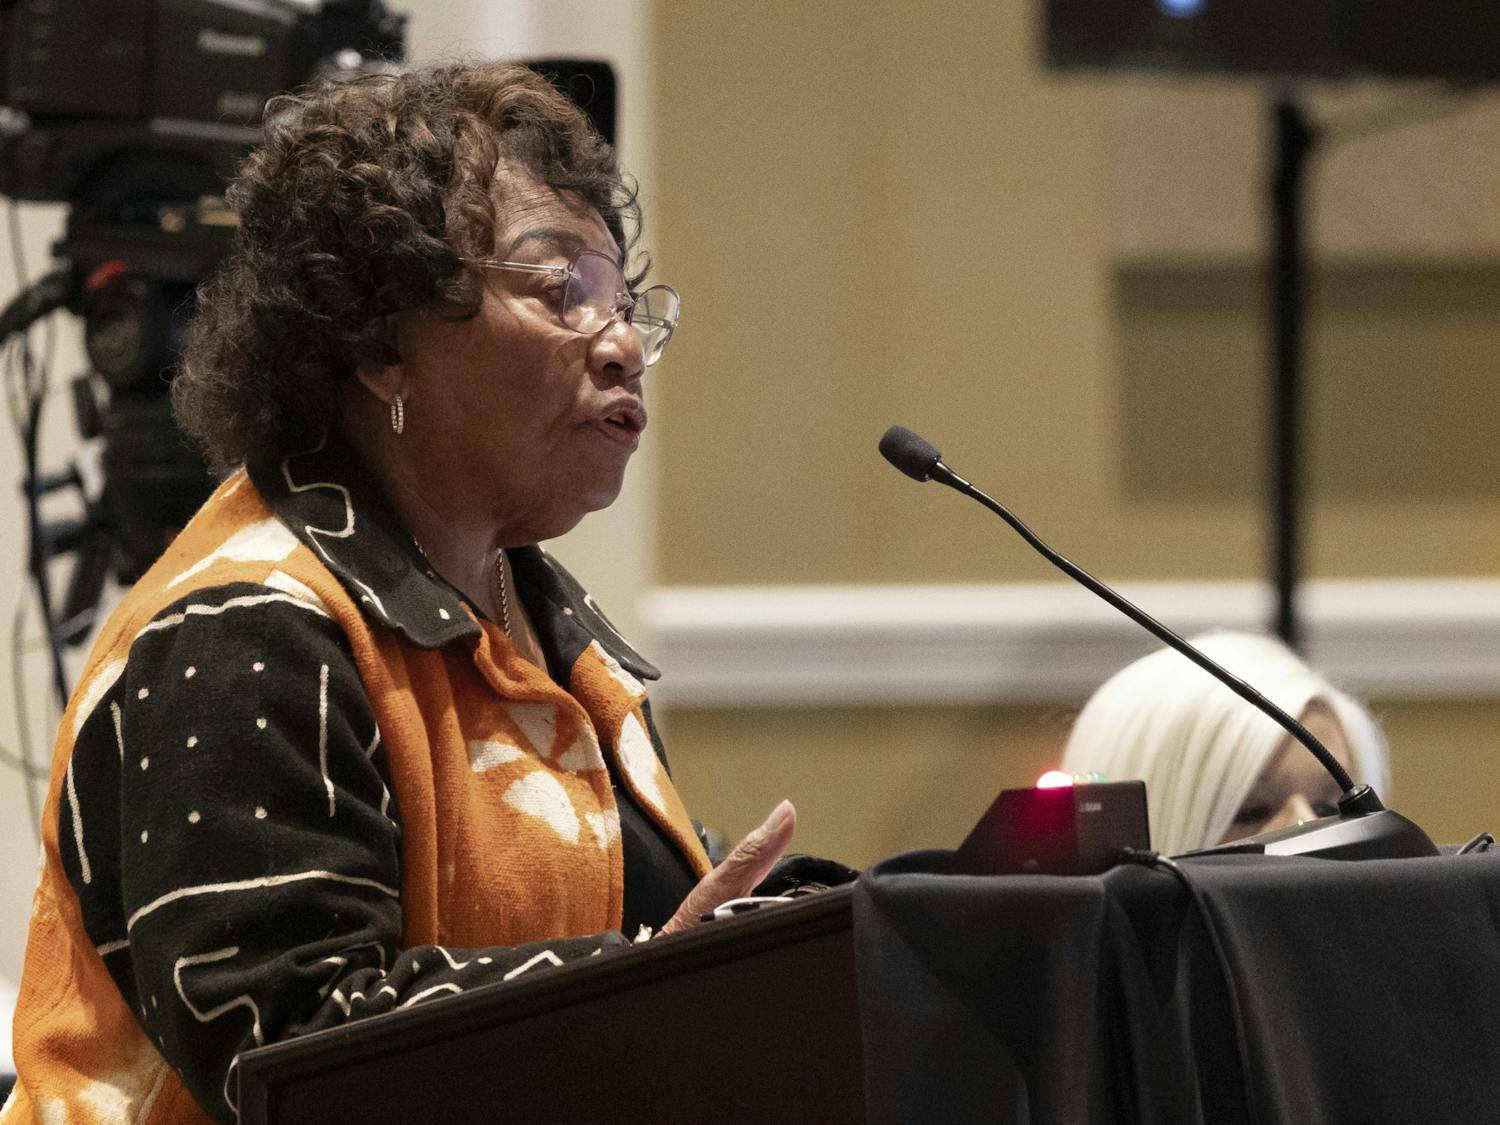 Senator Geraldine Thompson, addresses the State Board of Education about Florida's State Academic Standards and teaching African American studies to public schools students in Orlando, Fla., Wednesday, July 19, 2023. The State Board of Education was meeting in Orlando to adopt a number of rules required by new state laws. (Willie J. Allen Jr./Orlando Sentinel via AP)